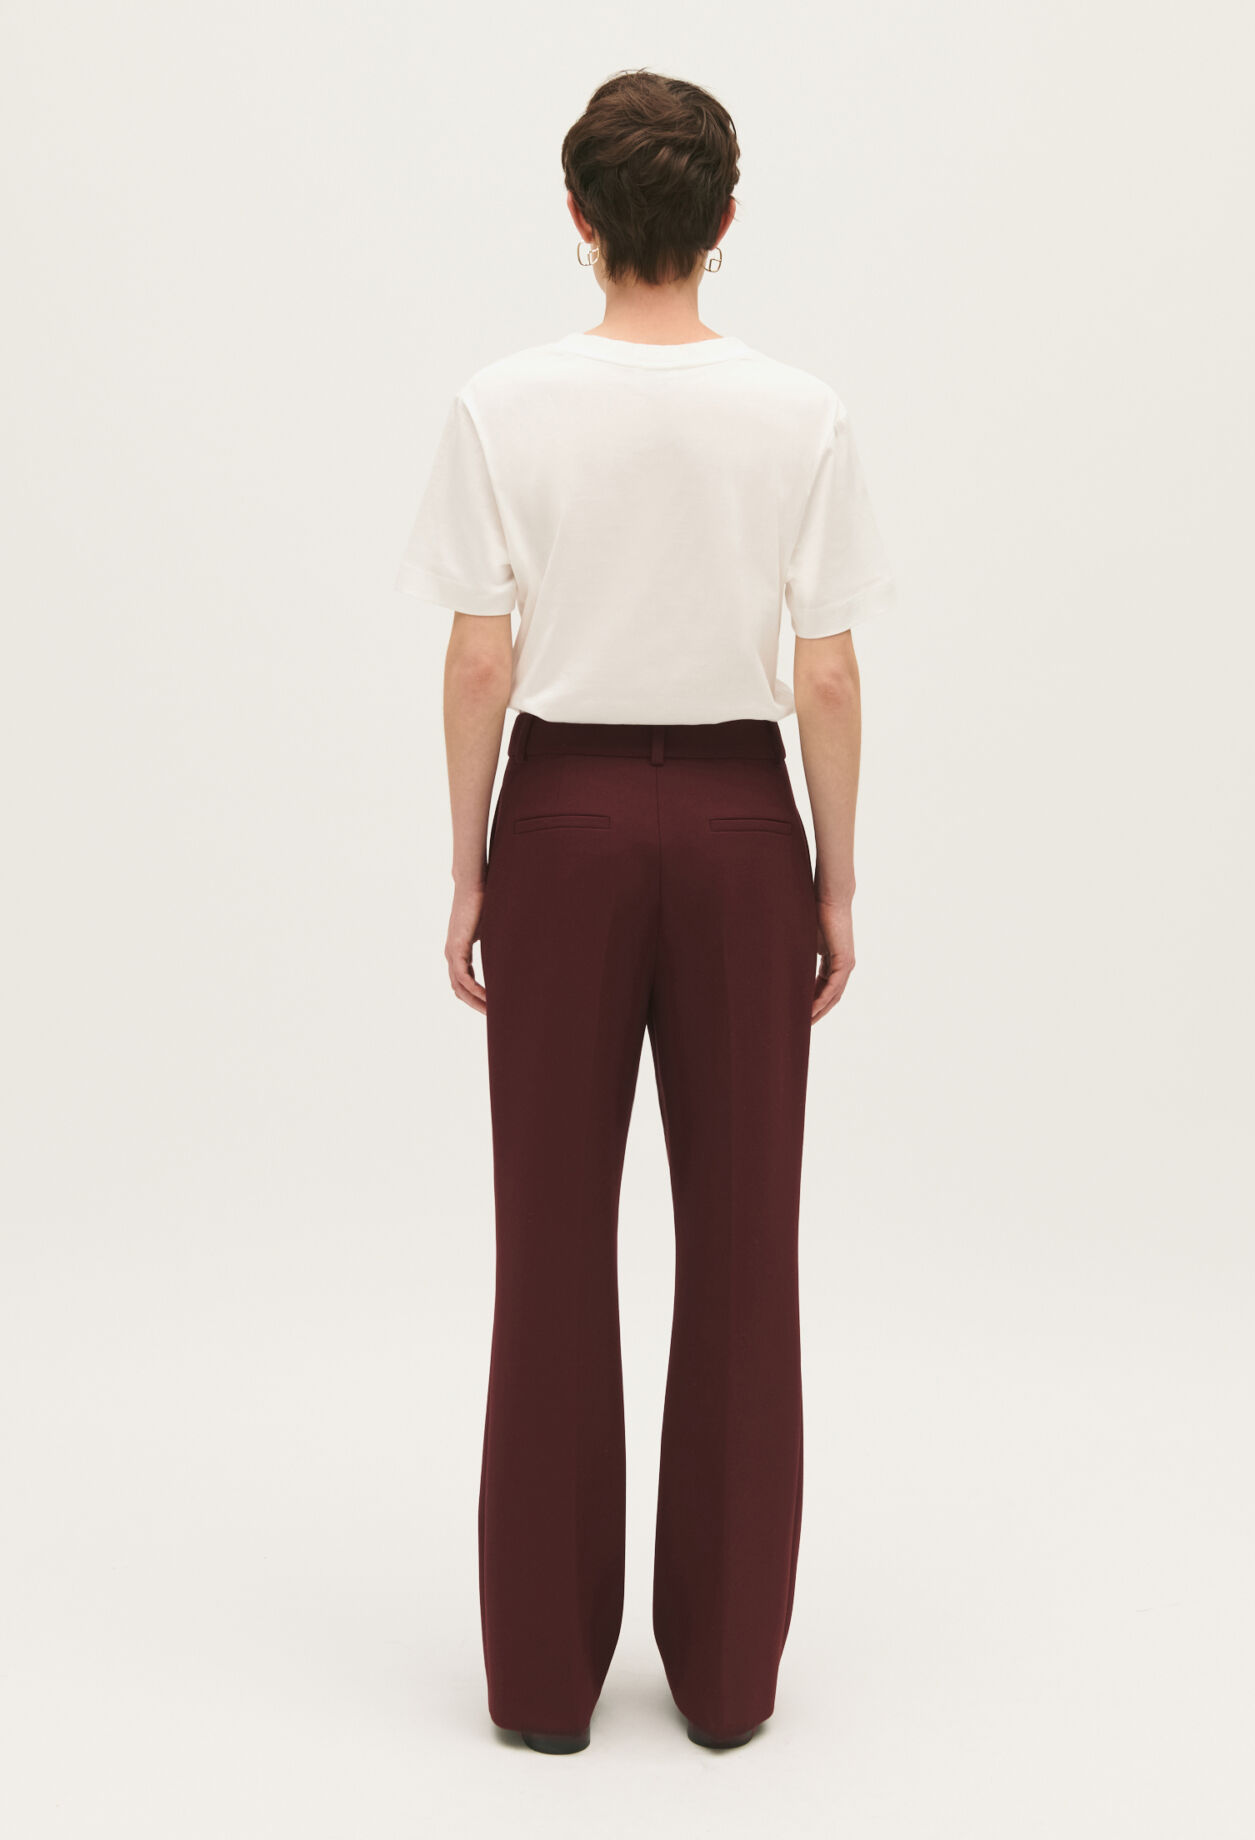 Zara High Waist Belted Trousers Burgundy worn by Pippa (Anna Francolini) as  seen in The Diplomat (S01E02) | Spotern